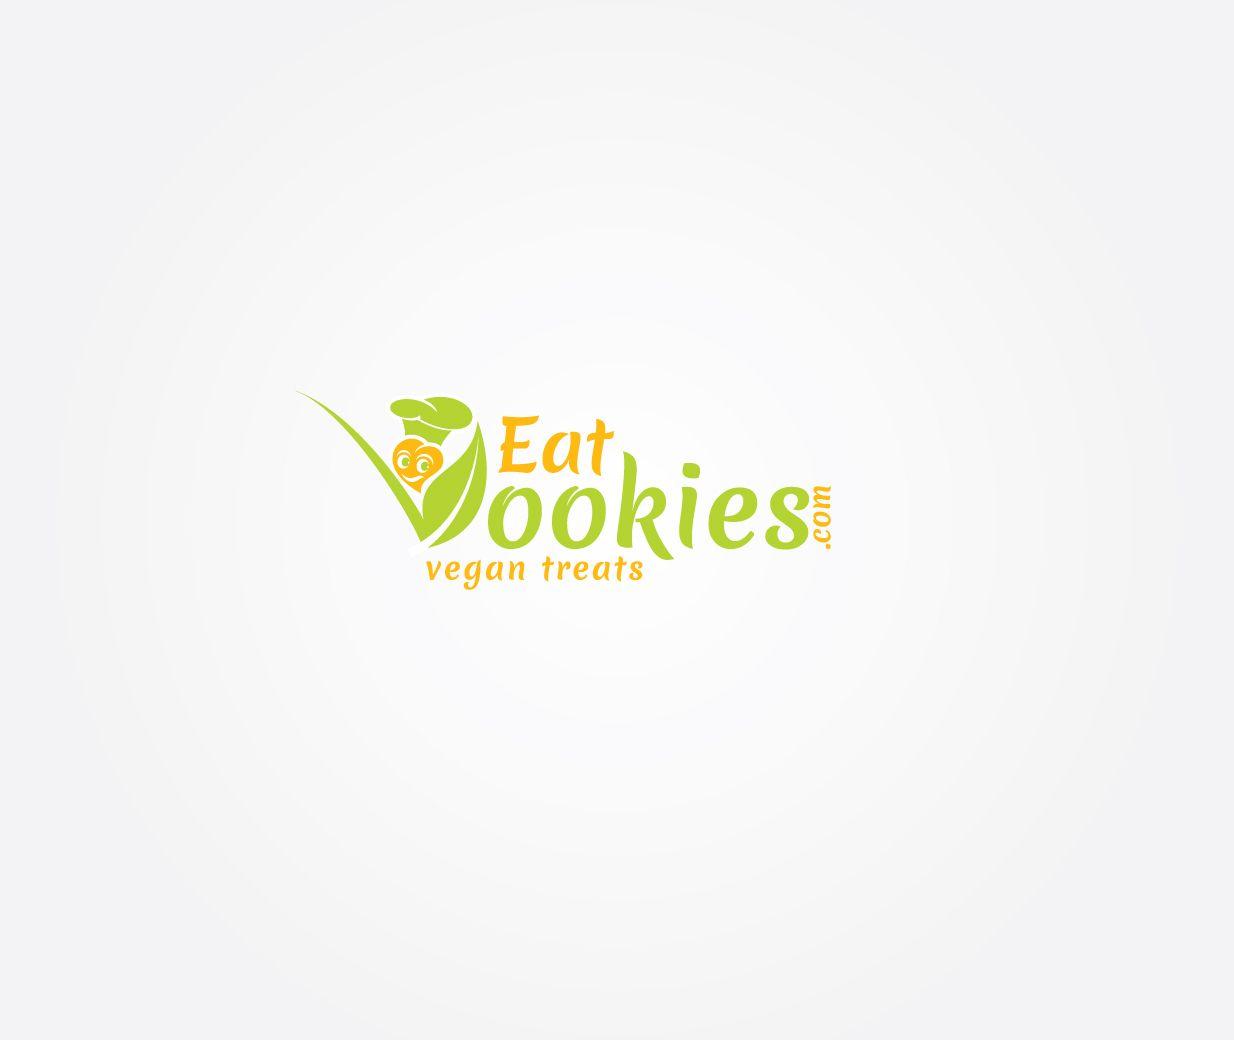 Info Please Logo - Personable, Colorful, Small Business Logo Design for EatVookies.com